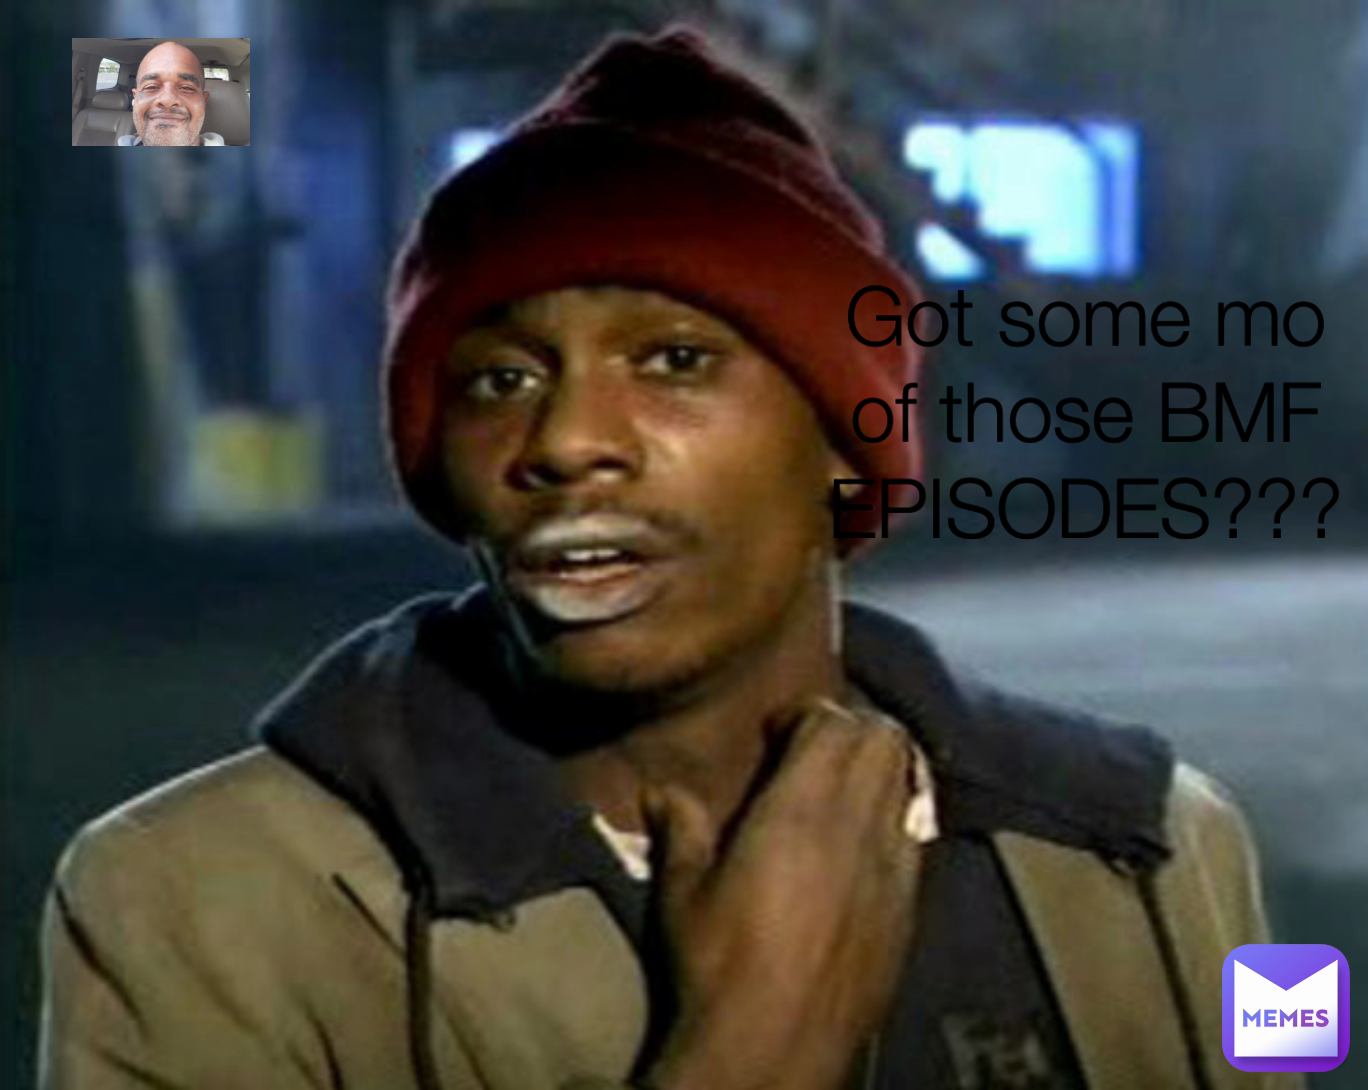 Got some mo of those BMF EPISODES???